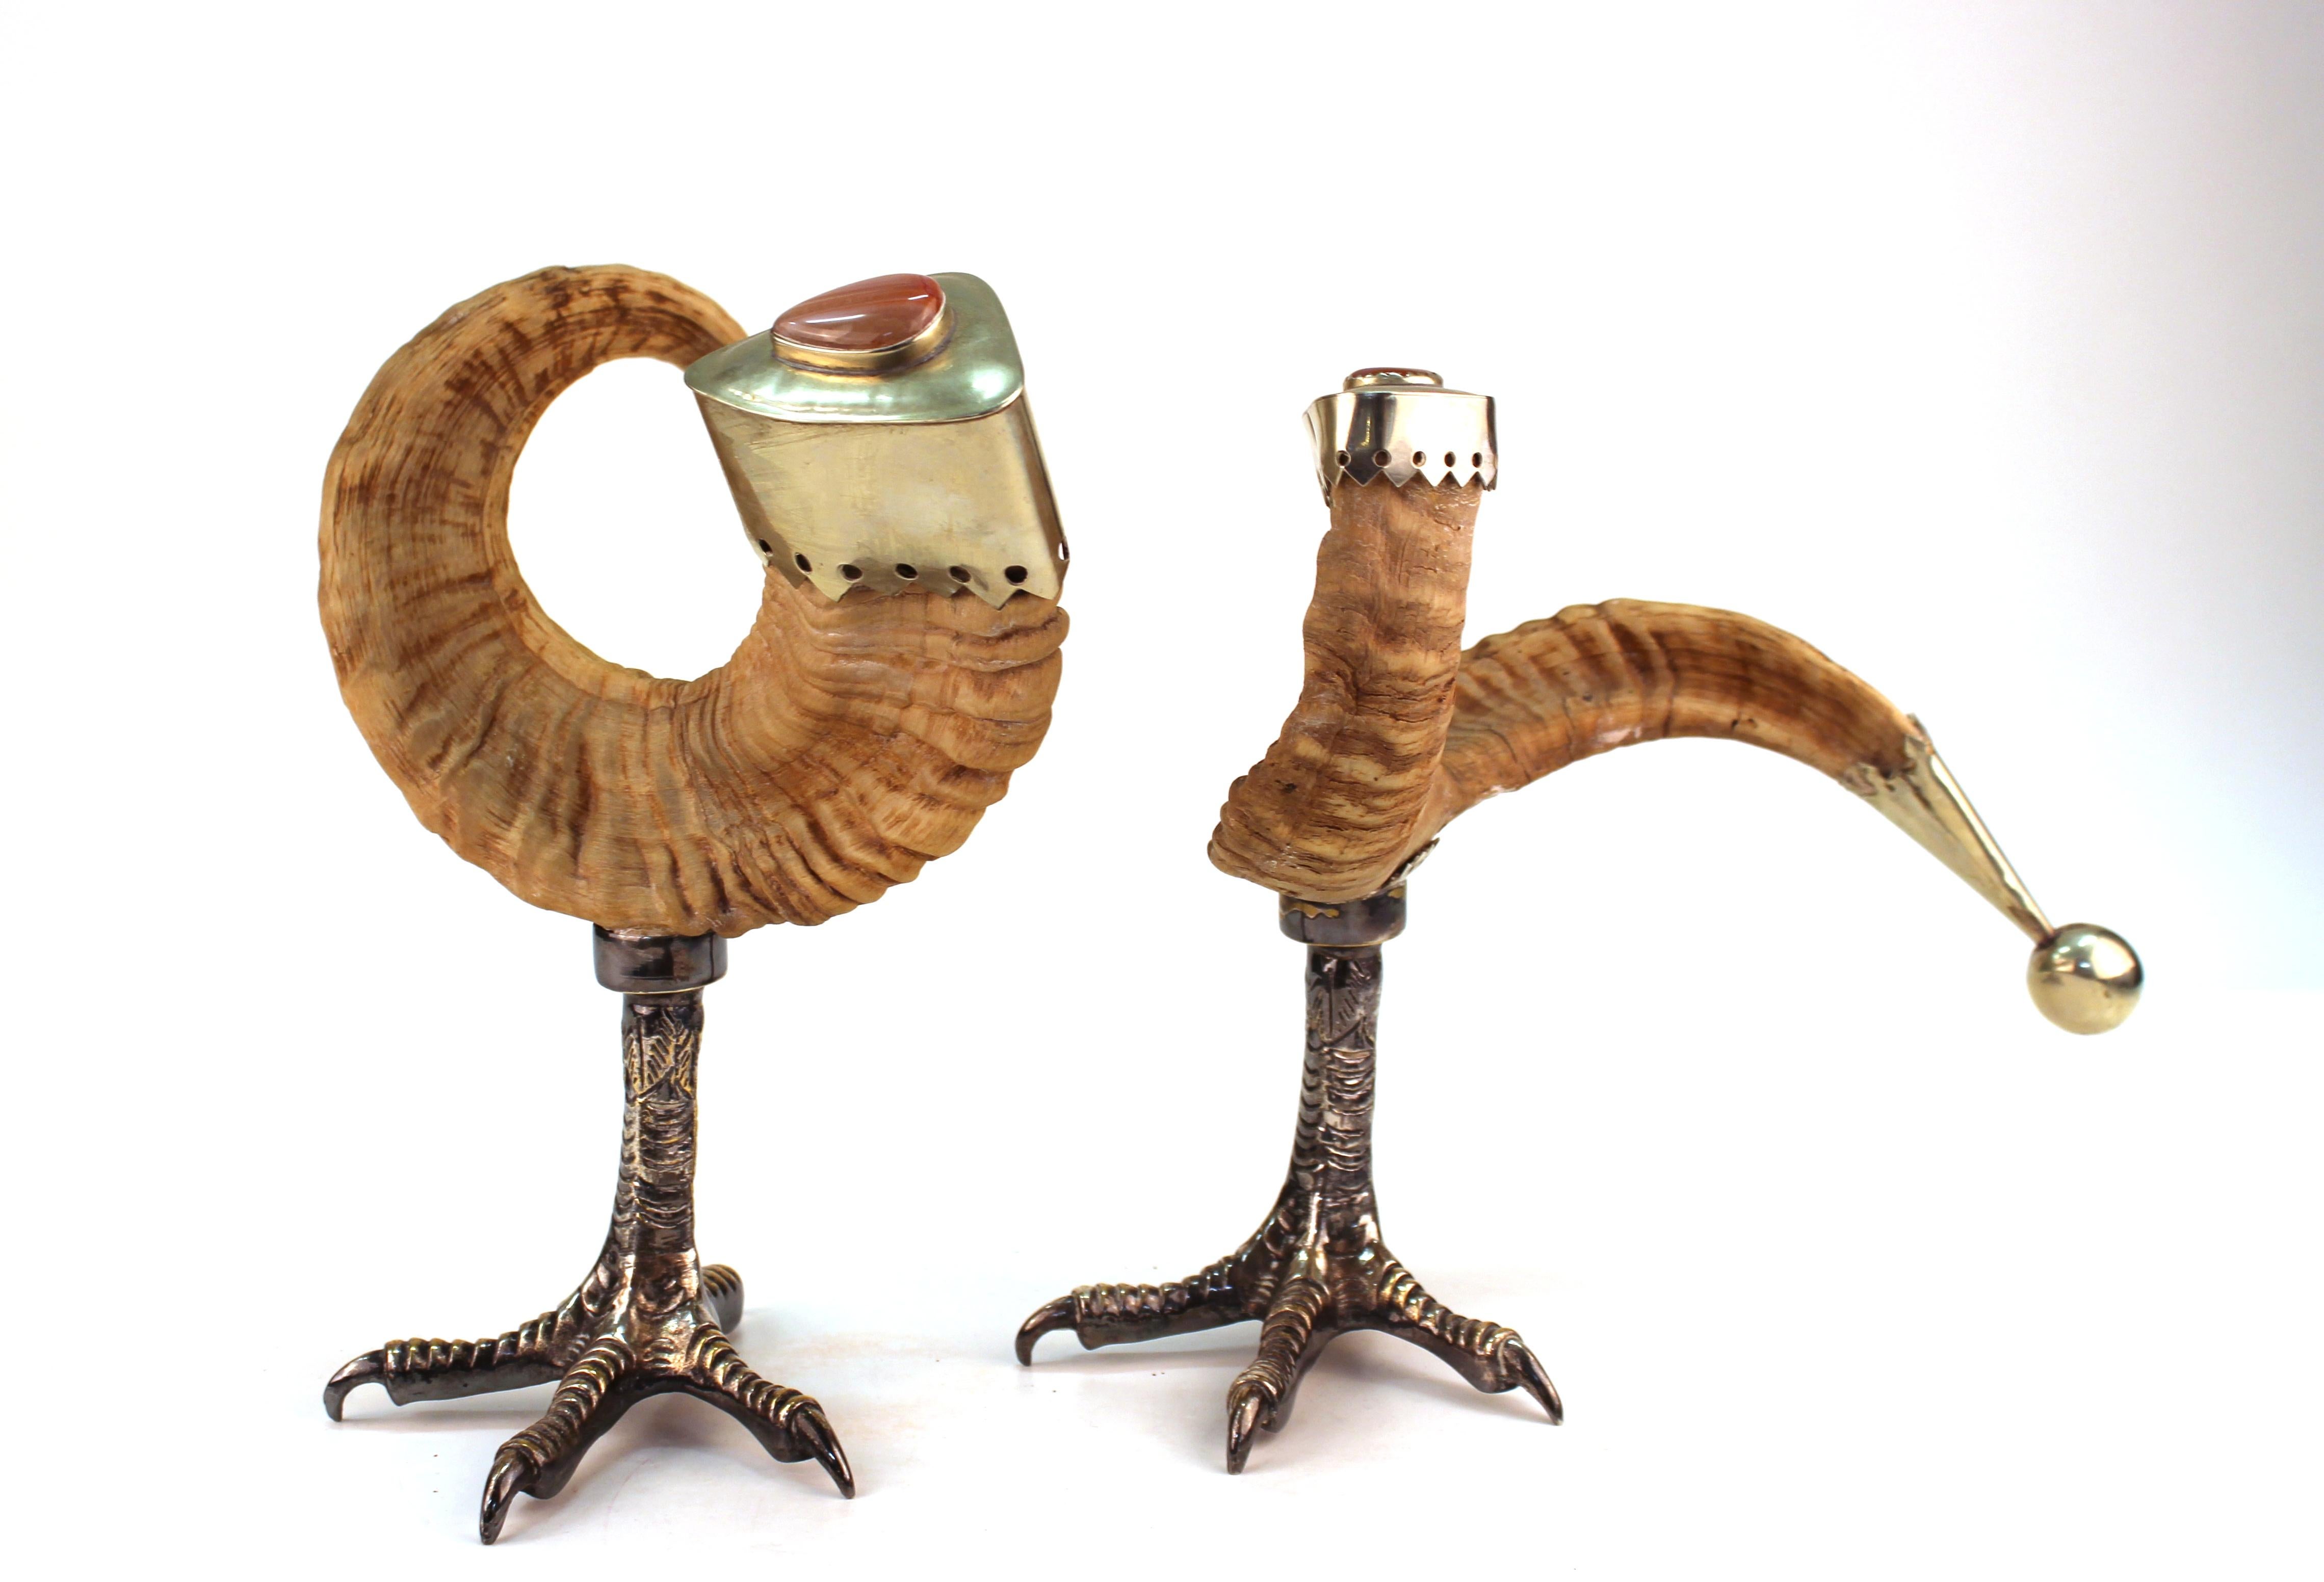 Anthony Redmile Mid-Century Modern decorative ram horns with silver-plated caps and rhodocrosite cabochons. The horns have ball ends and are mounted atop eagle claw feet.